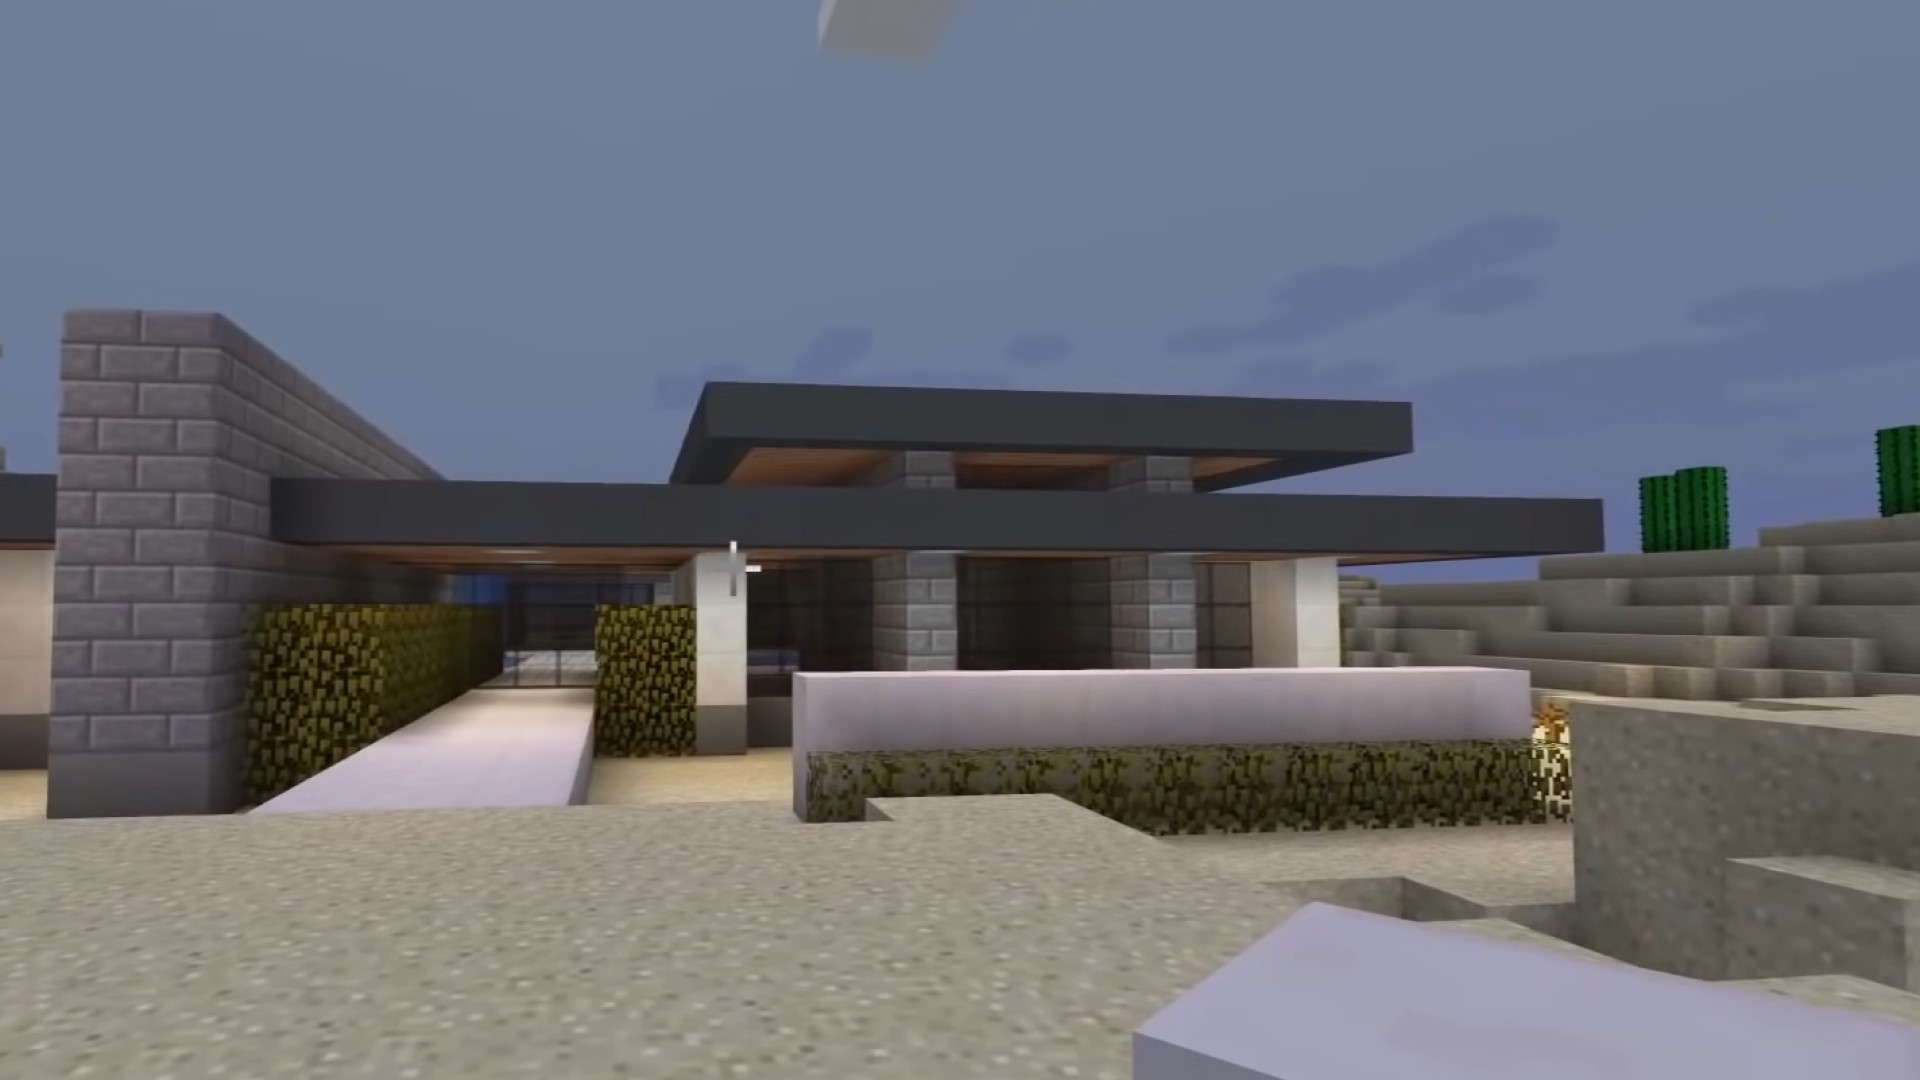 A Minecraft mansion designed by a professional architect